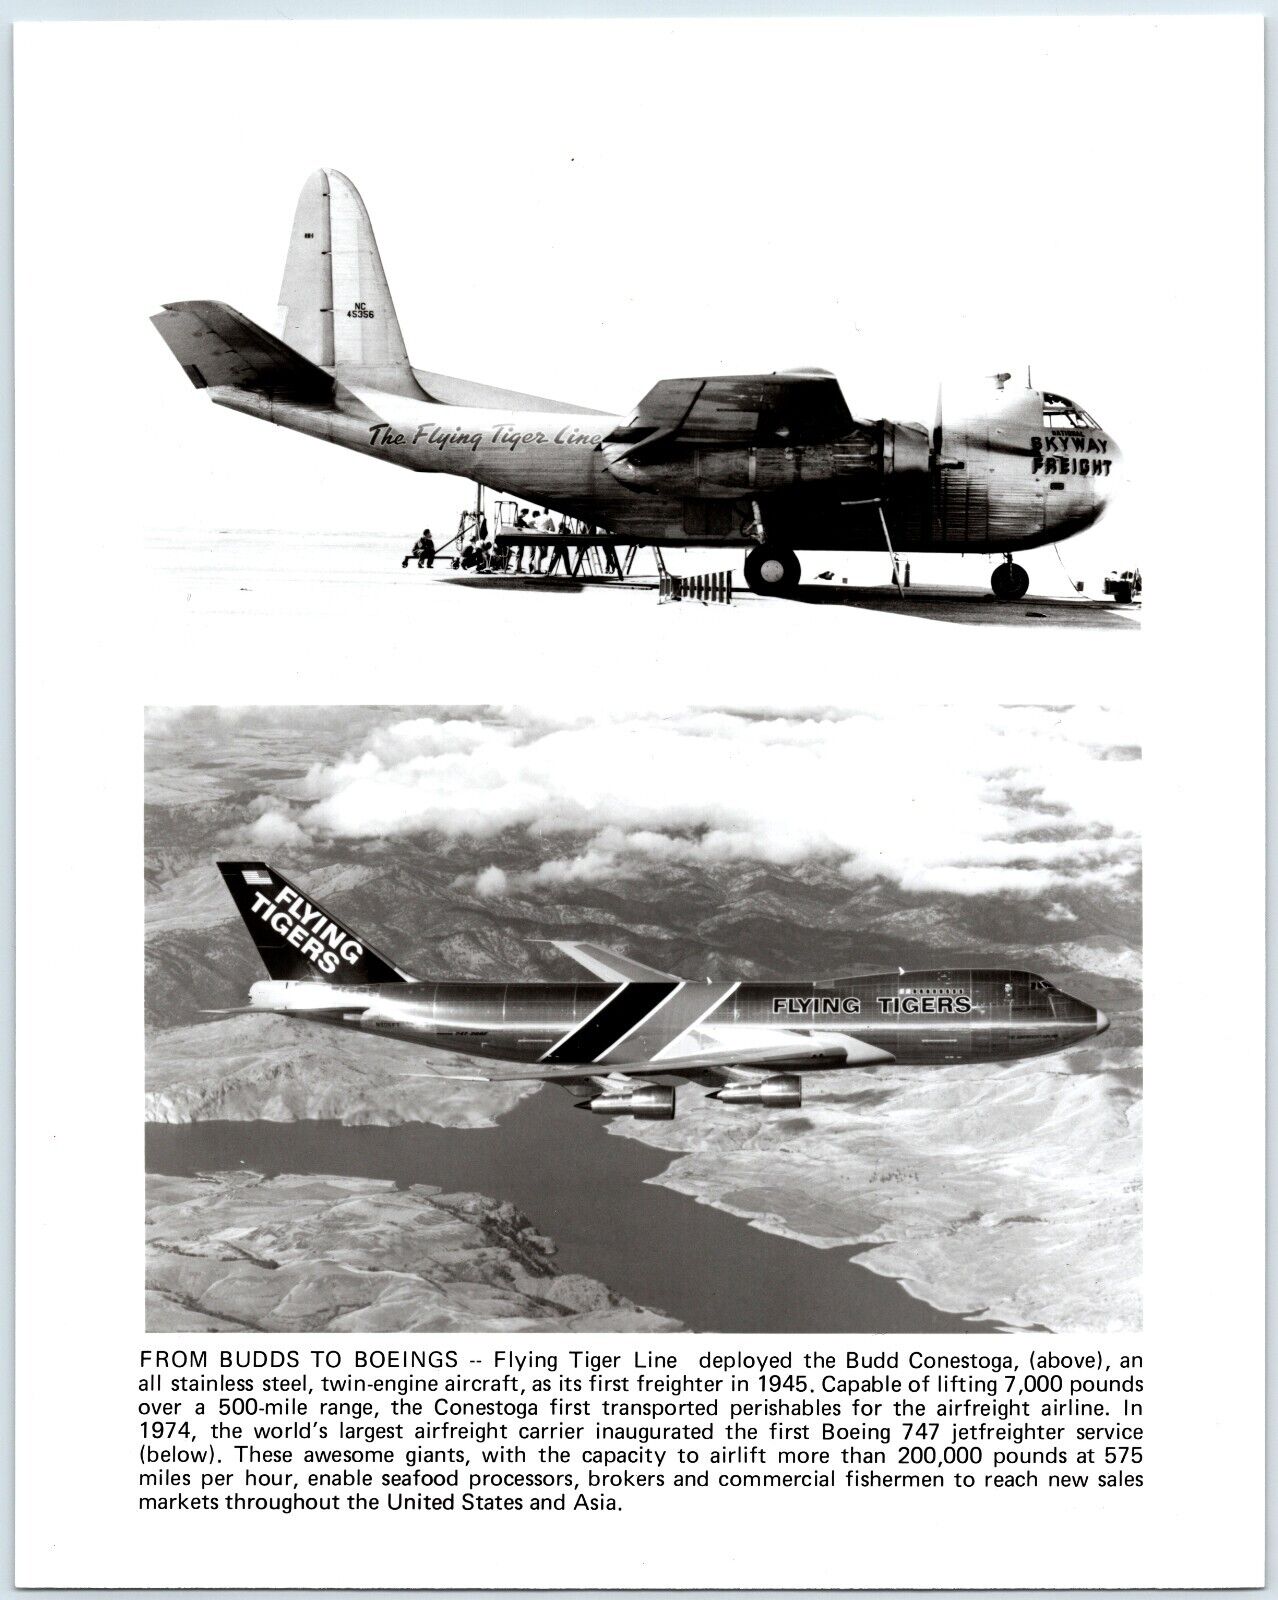 Budd Conestoga and Boeing 747 planes, AVG Flying Tigers, WW2, (1970s) Photo